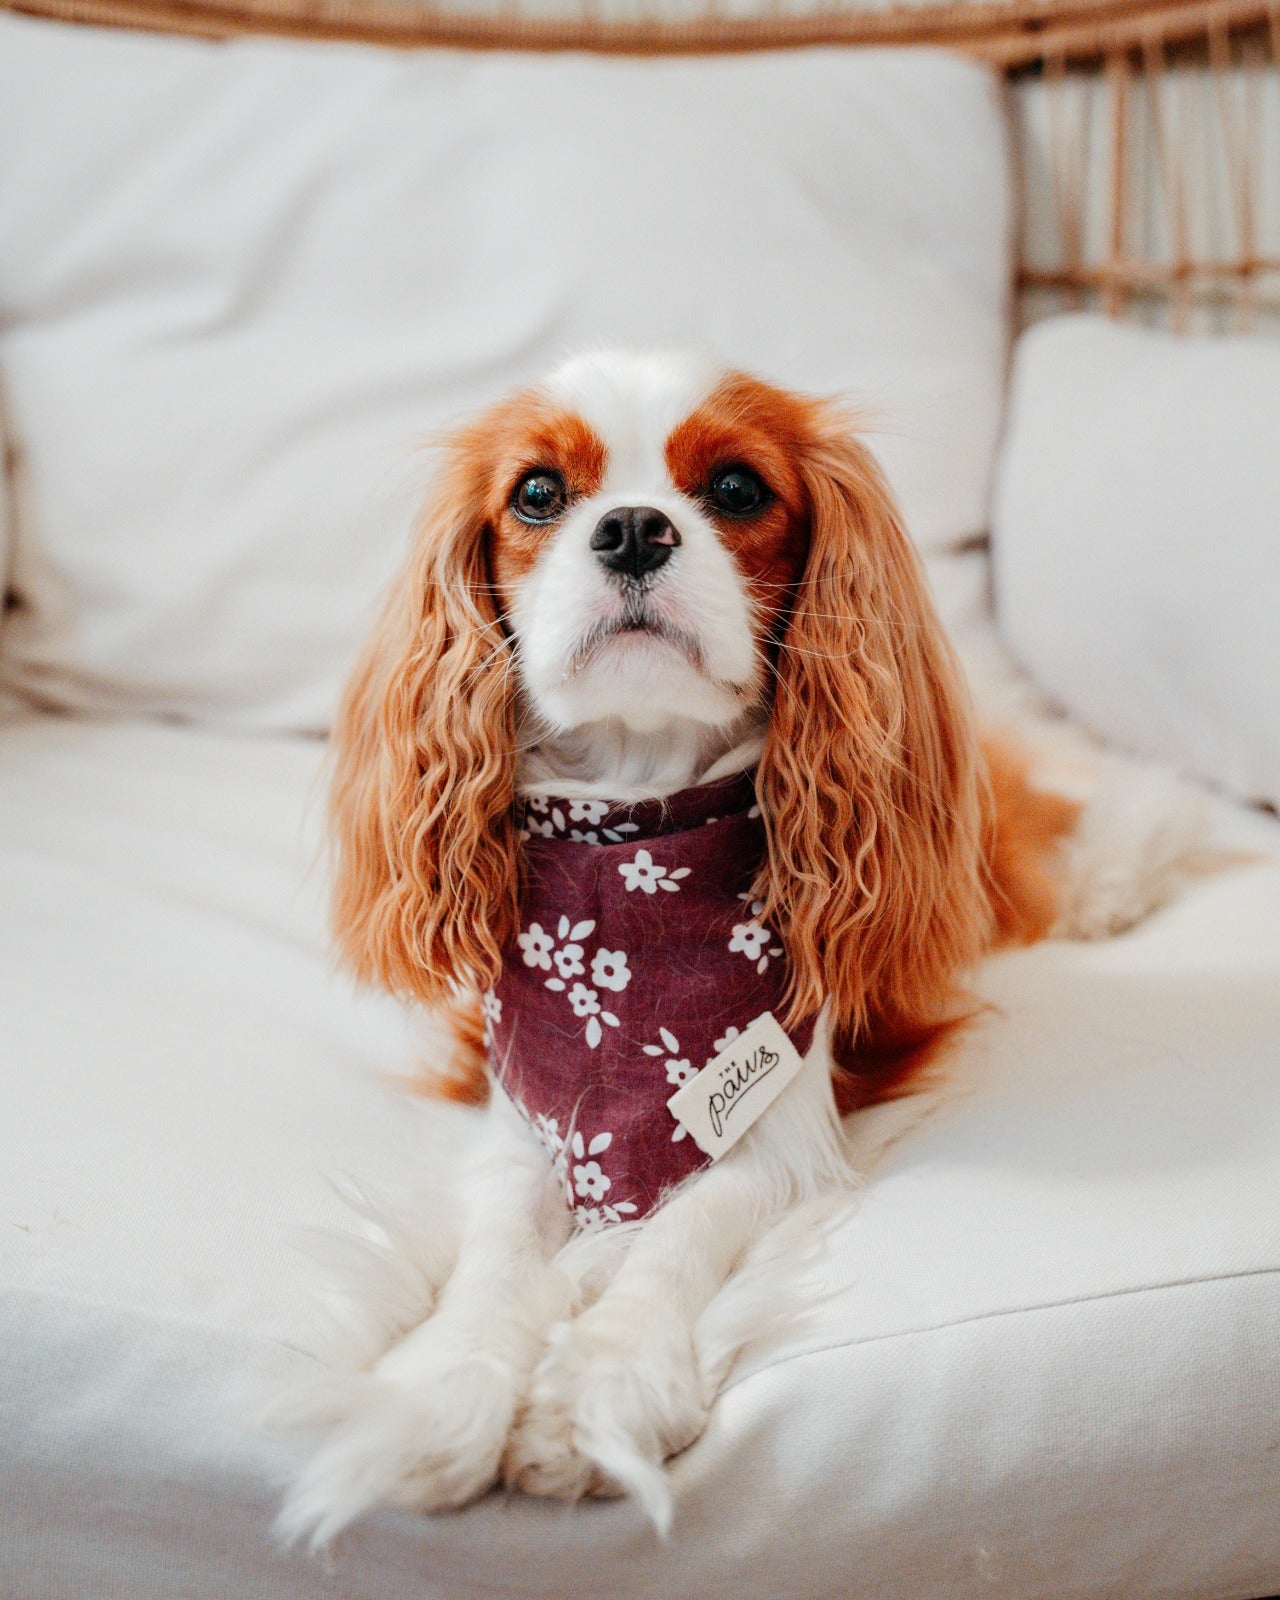 Relaxing in the Chatham Dog Bandana from The Paws